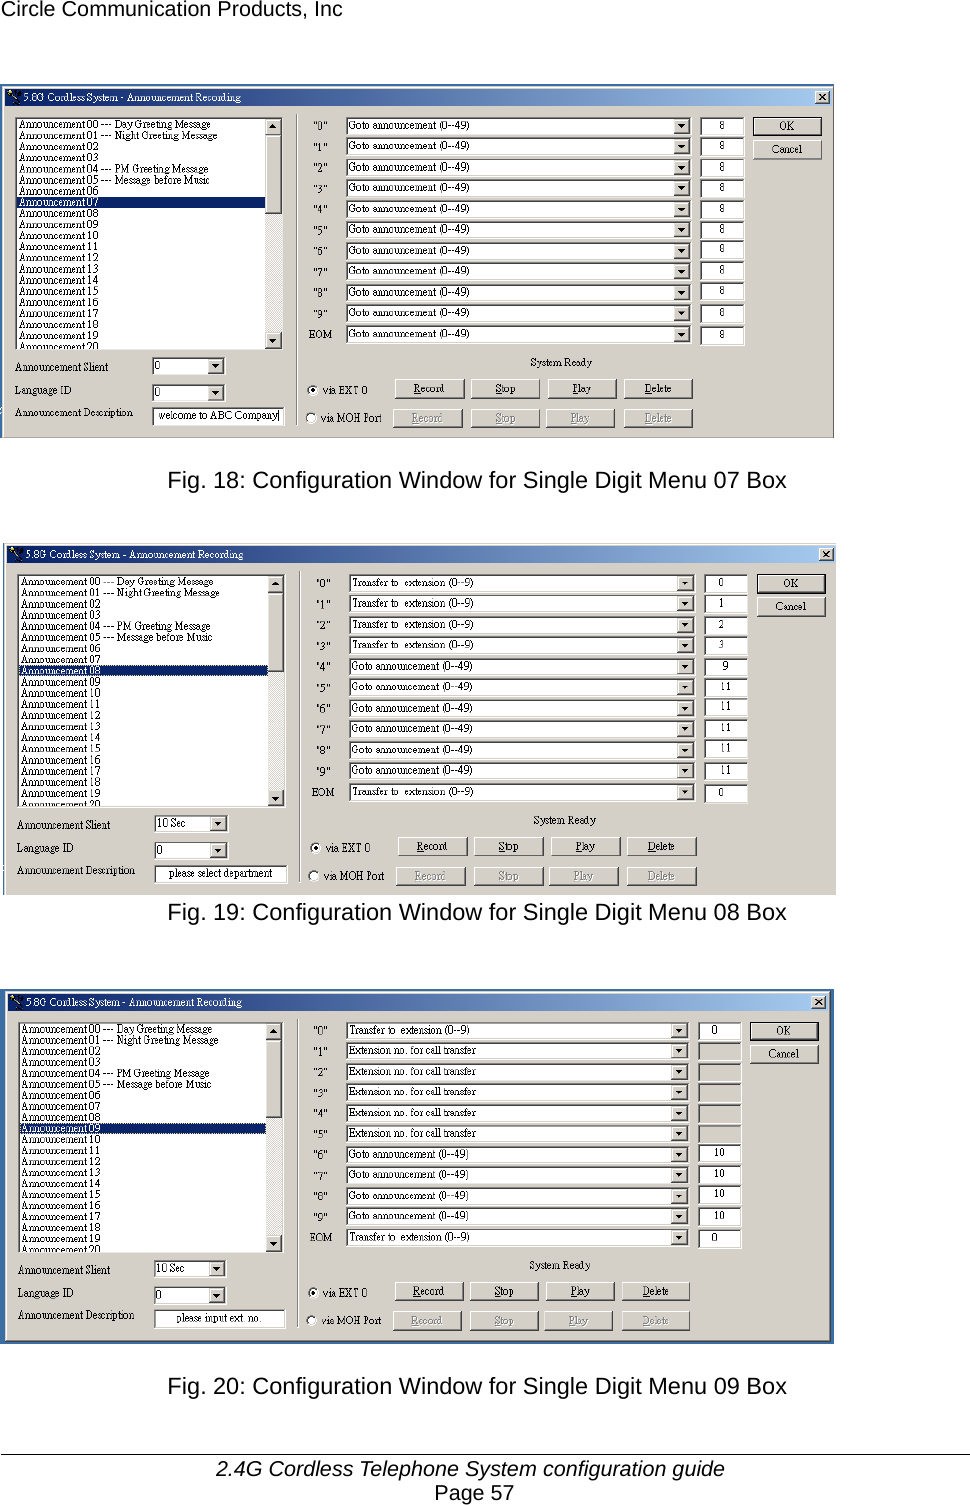 Circle Communication Products, Inc     2.4G Cordless Telephone System configuration guide Page 57  Fig. 18: Configuration Window for Single Digit Menu 07 Box           Fig. 19: Configuration Window for Single Digit Menu 08 Box   Fig. 20: Configuration Window for Single Digit Menu 09 Box 